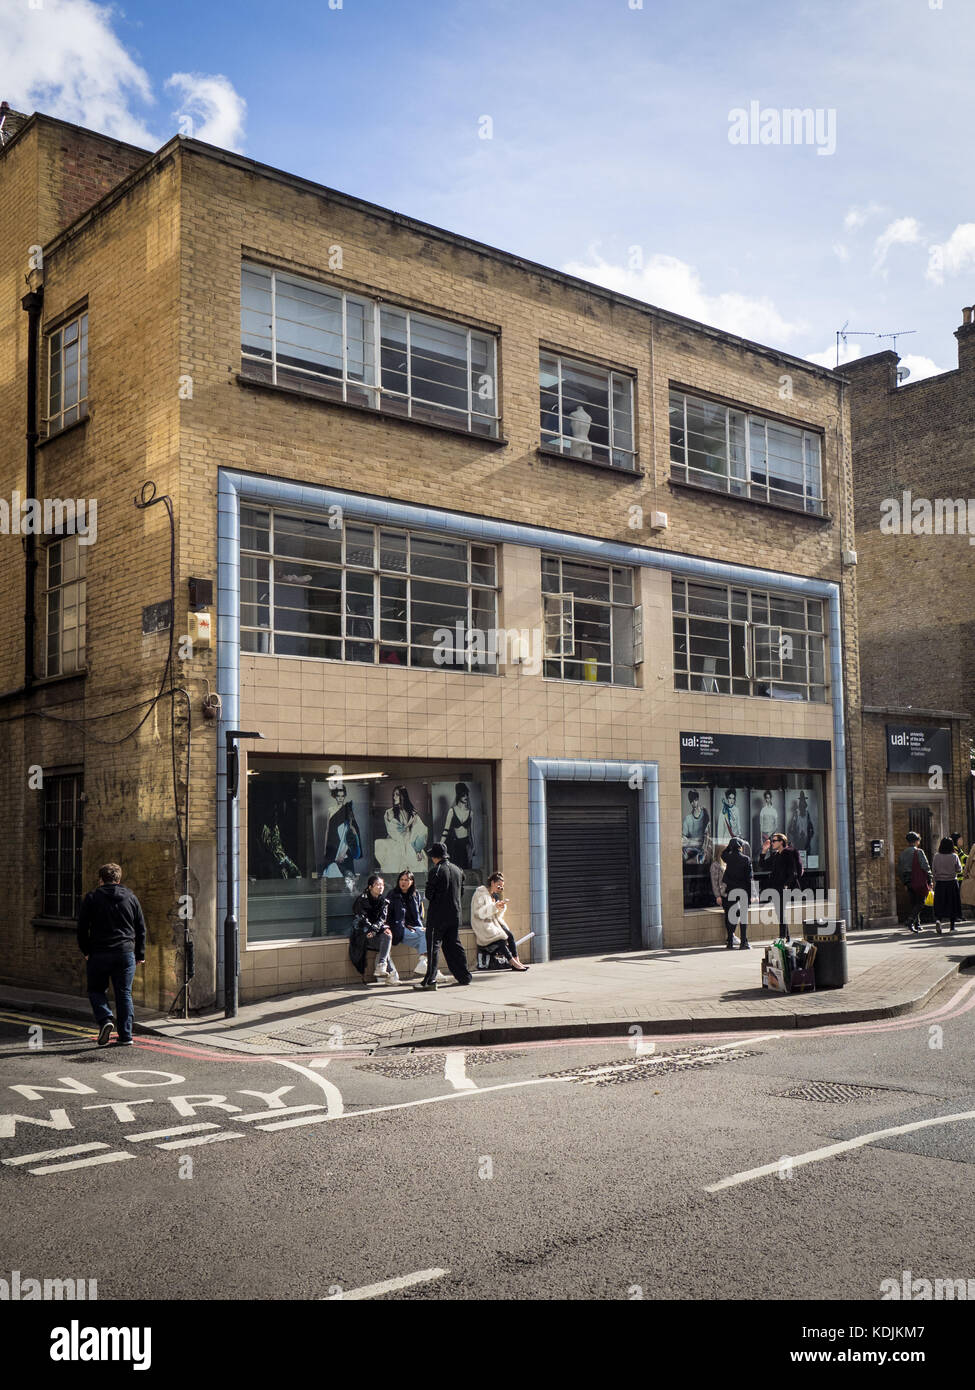 University of the Arts London College of Fashion dans Curtain Road, East London Shoreditch Banque D'Images